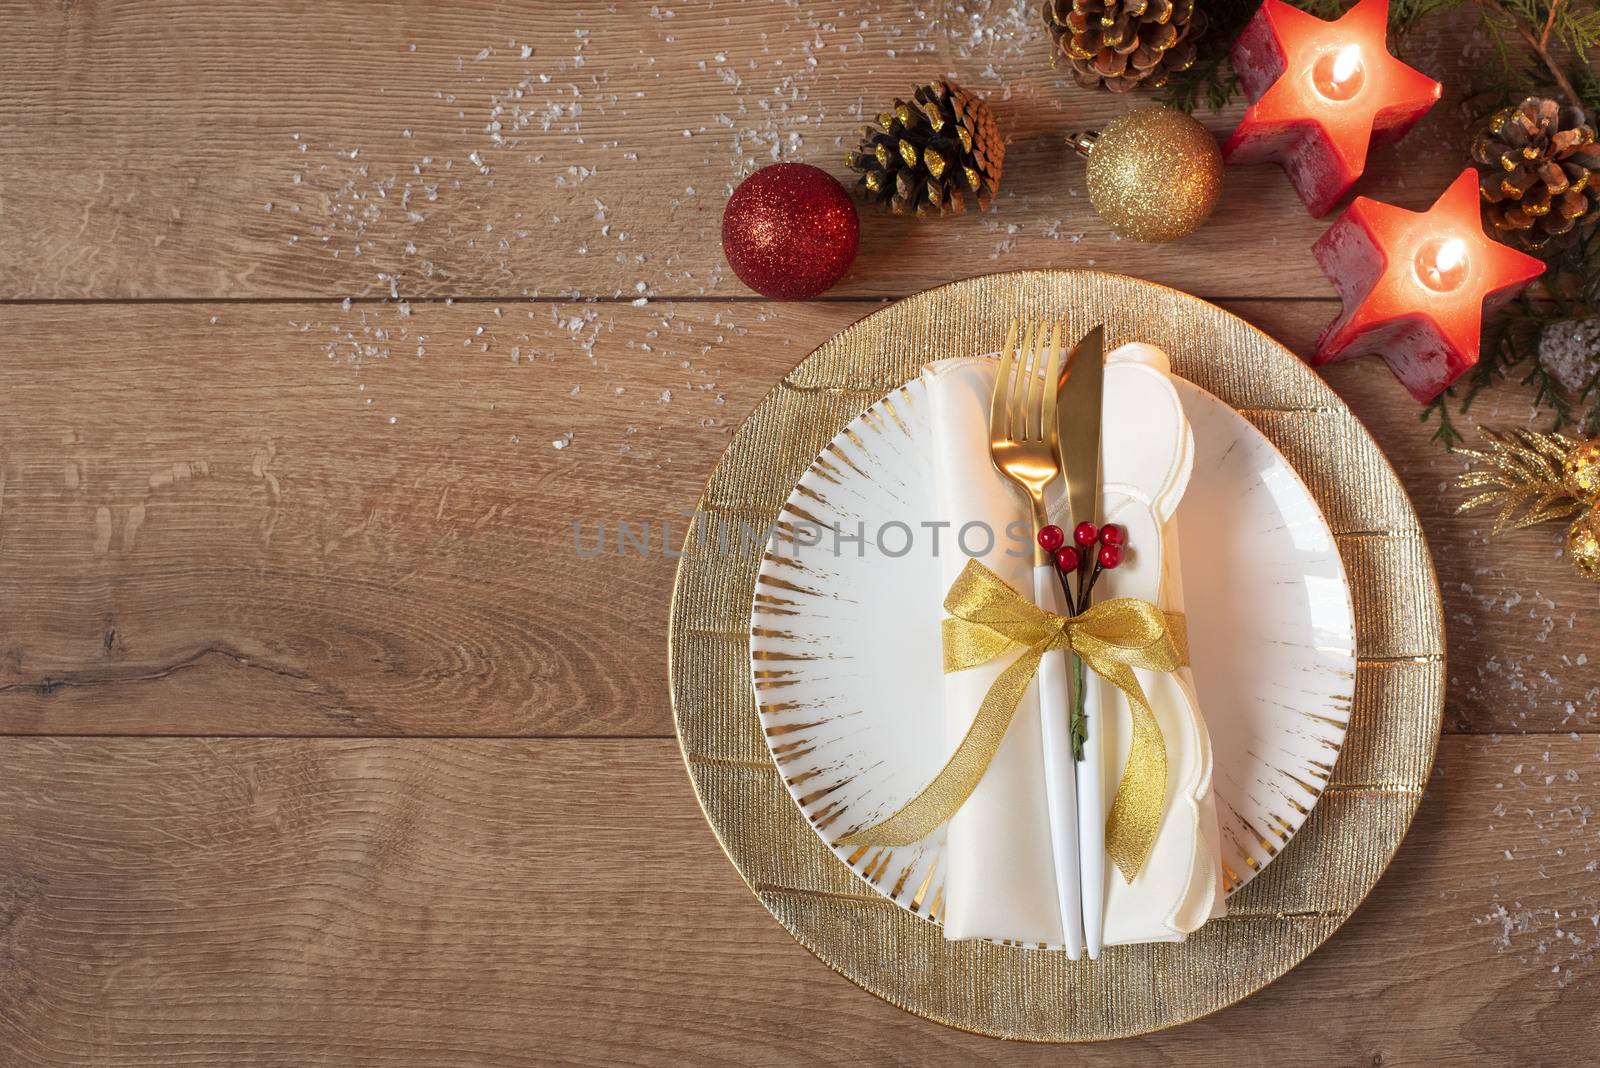 Christmas holiday dinner place setting - plates, napkin, cutlery, gold bauble decorations over oak table background. Fork and spoon on gold plates. Around red candles, cones and balls. Flat lay